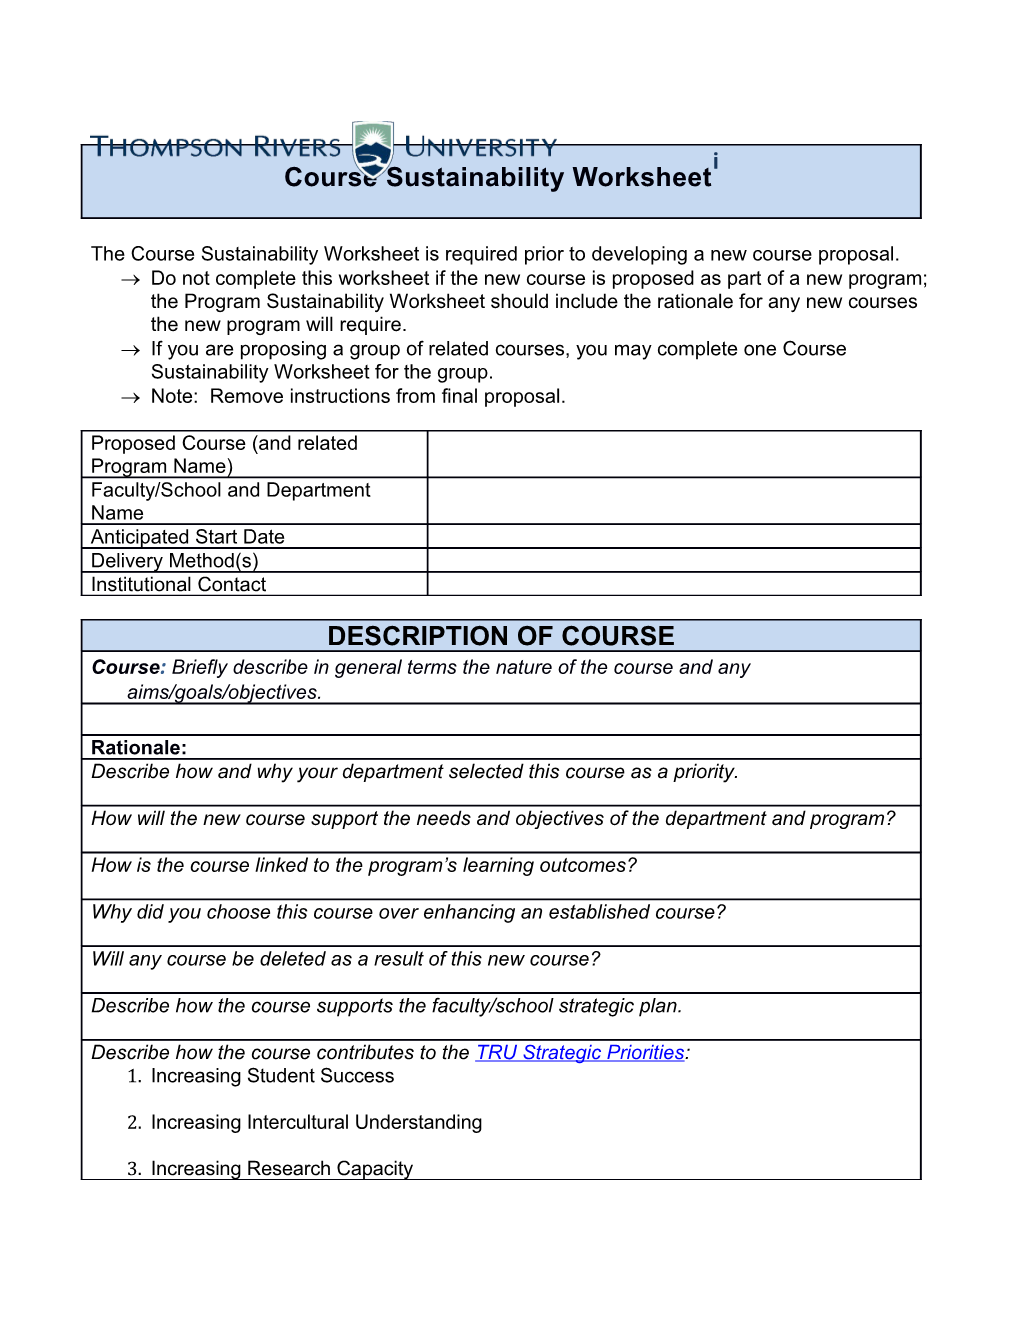 The Course Sustainability Worksheet Is Required Prior to Developing a New Course Proposal